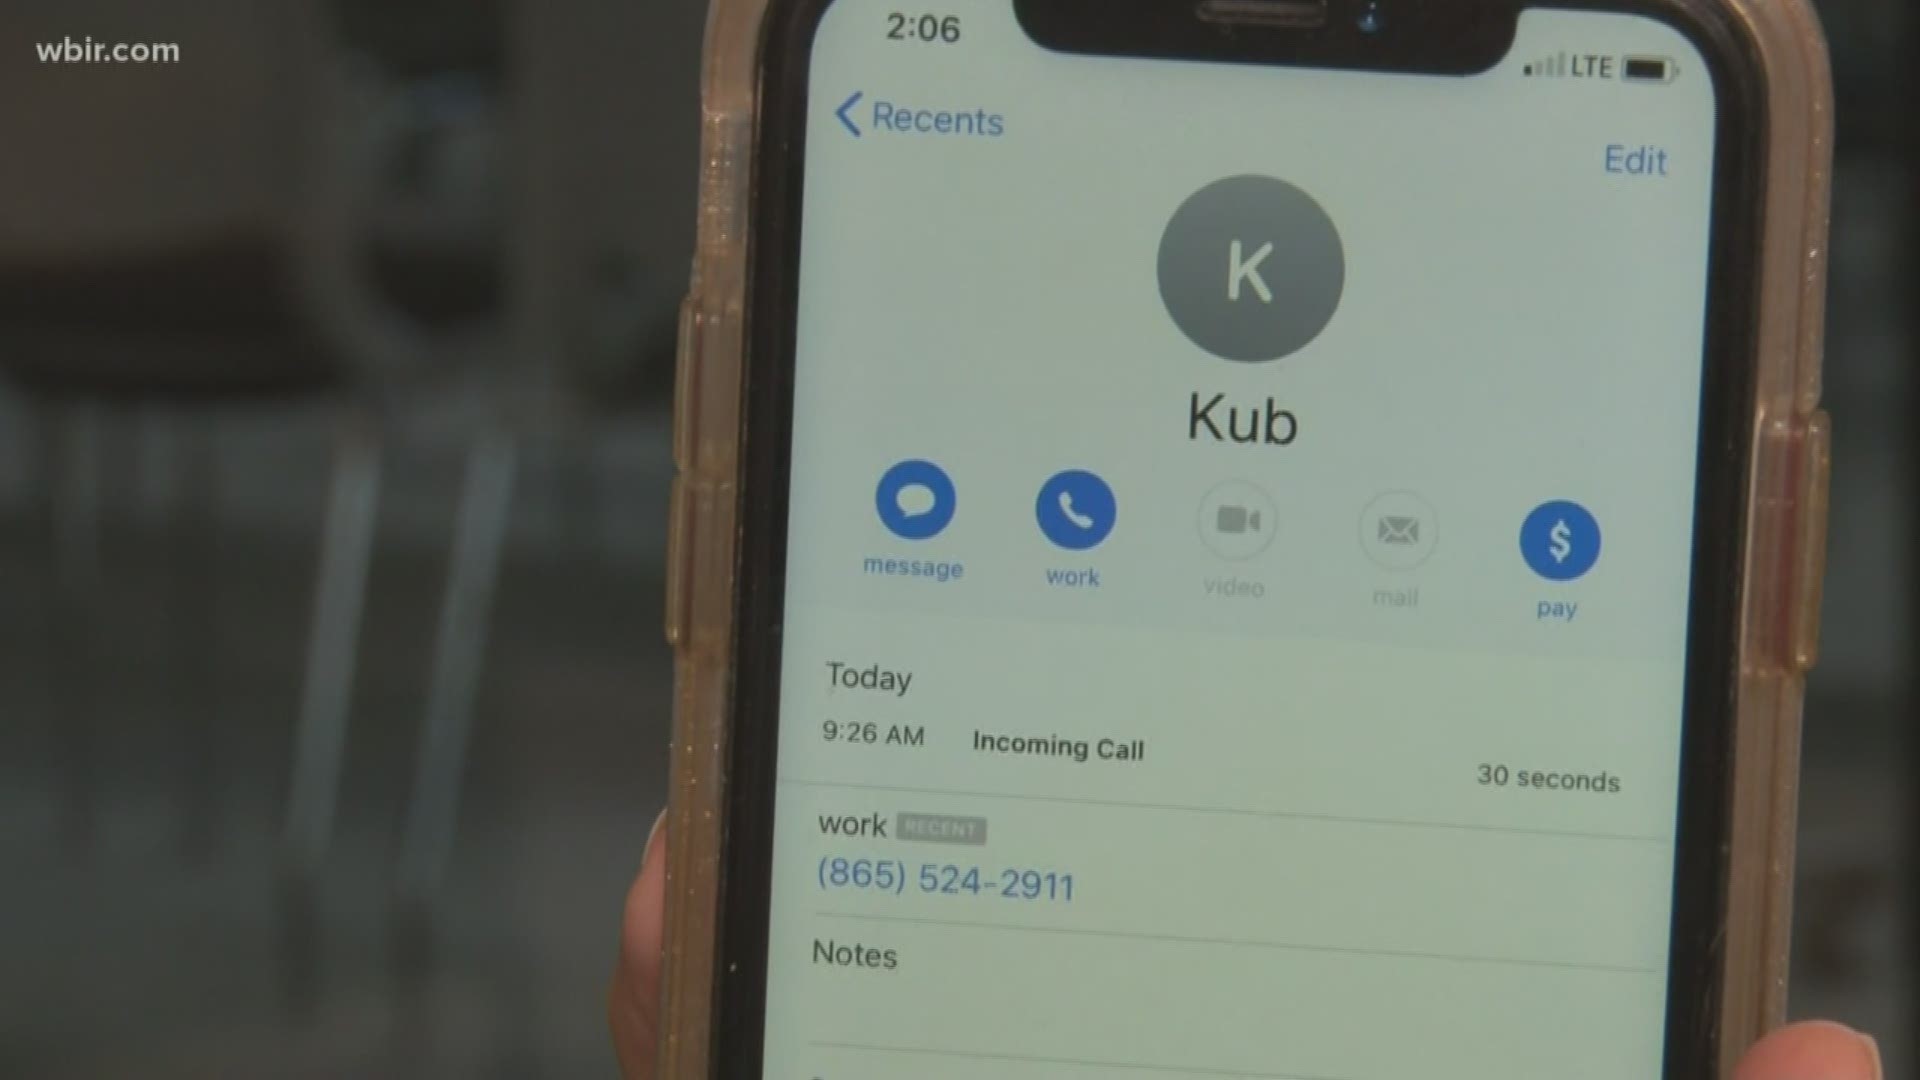 If you receive this call, KUB asks you to report it to the utility...so it can work to block the scammers before they reach more people.